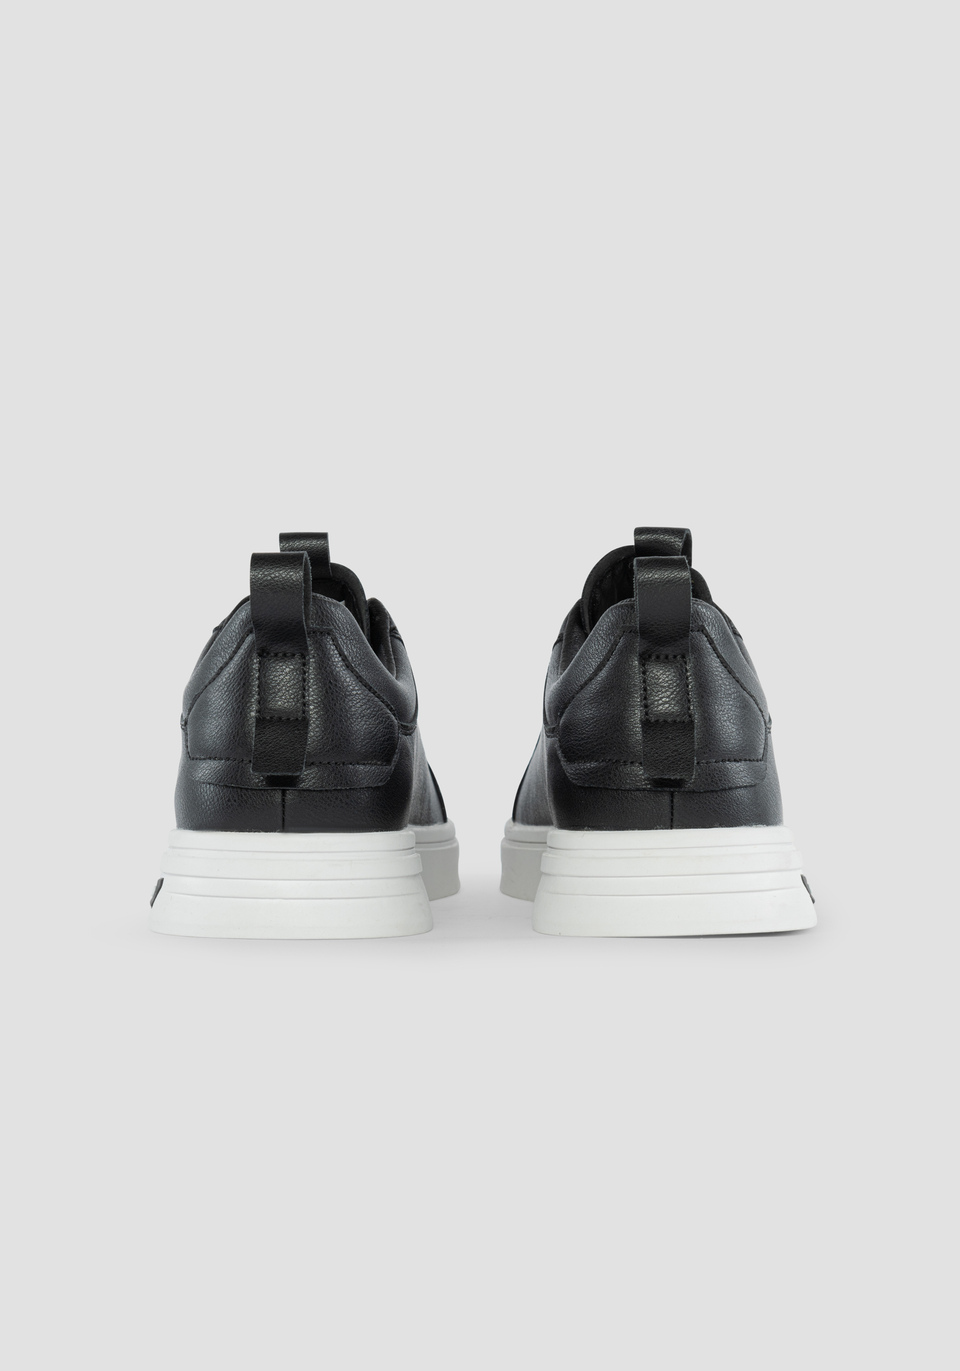 "GORE" LOW-TOP SNEAKERS IN TUMBLED FAUX LEATHER WITH SIDE DETAILS - Antony Morato Online Shop